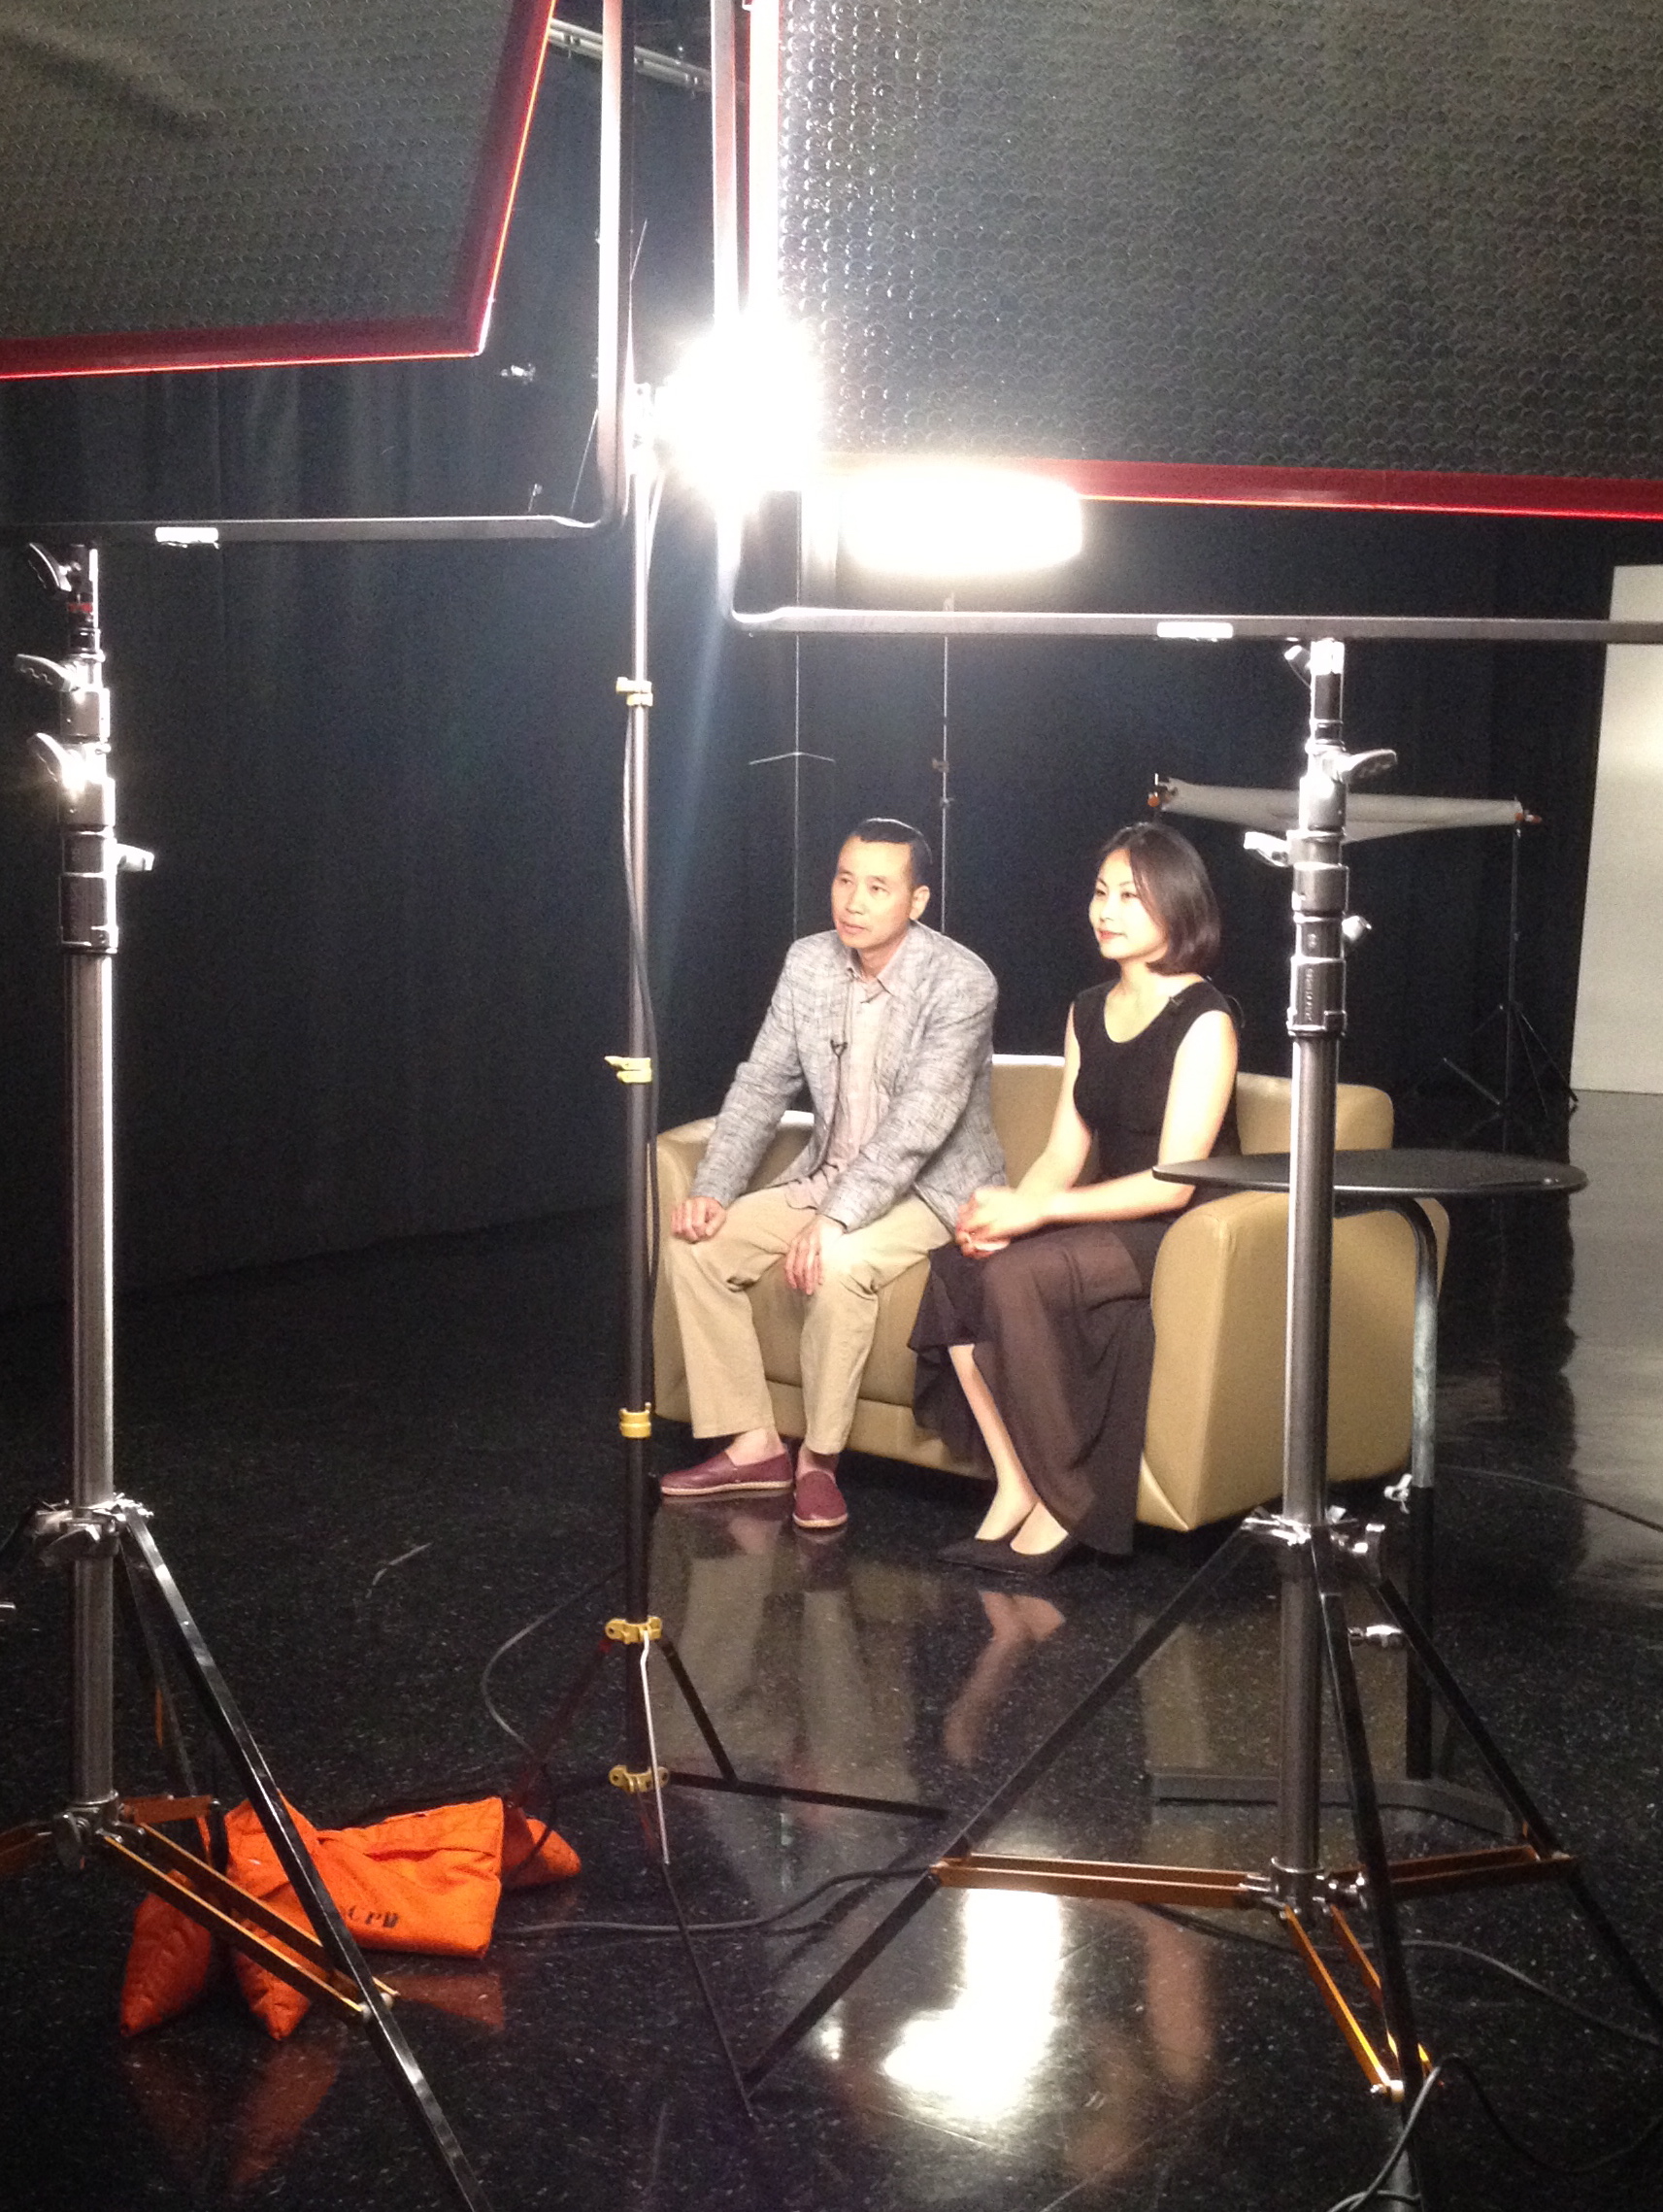 Ho Yi with leading lady Joy Ya at CBS studios, being interviewed